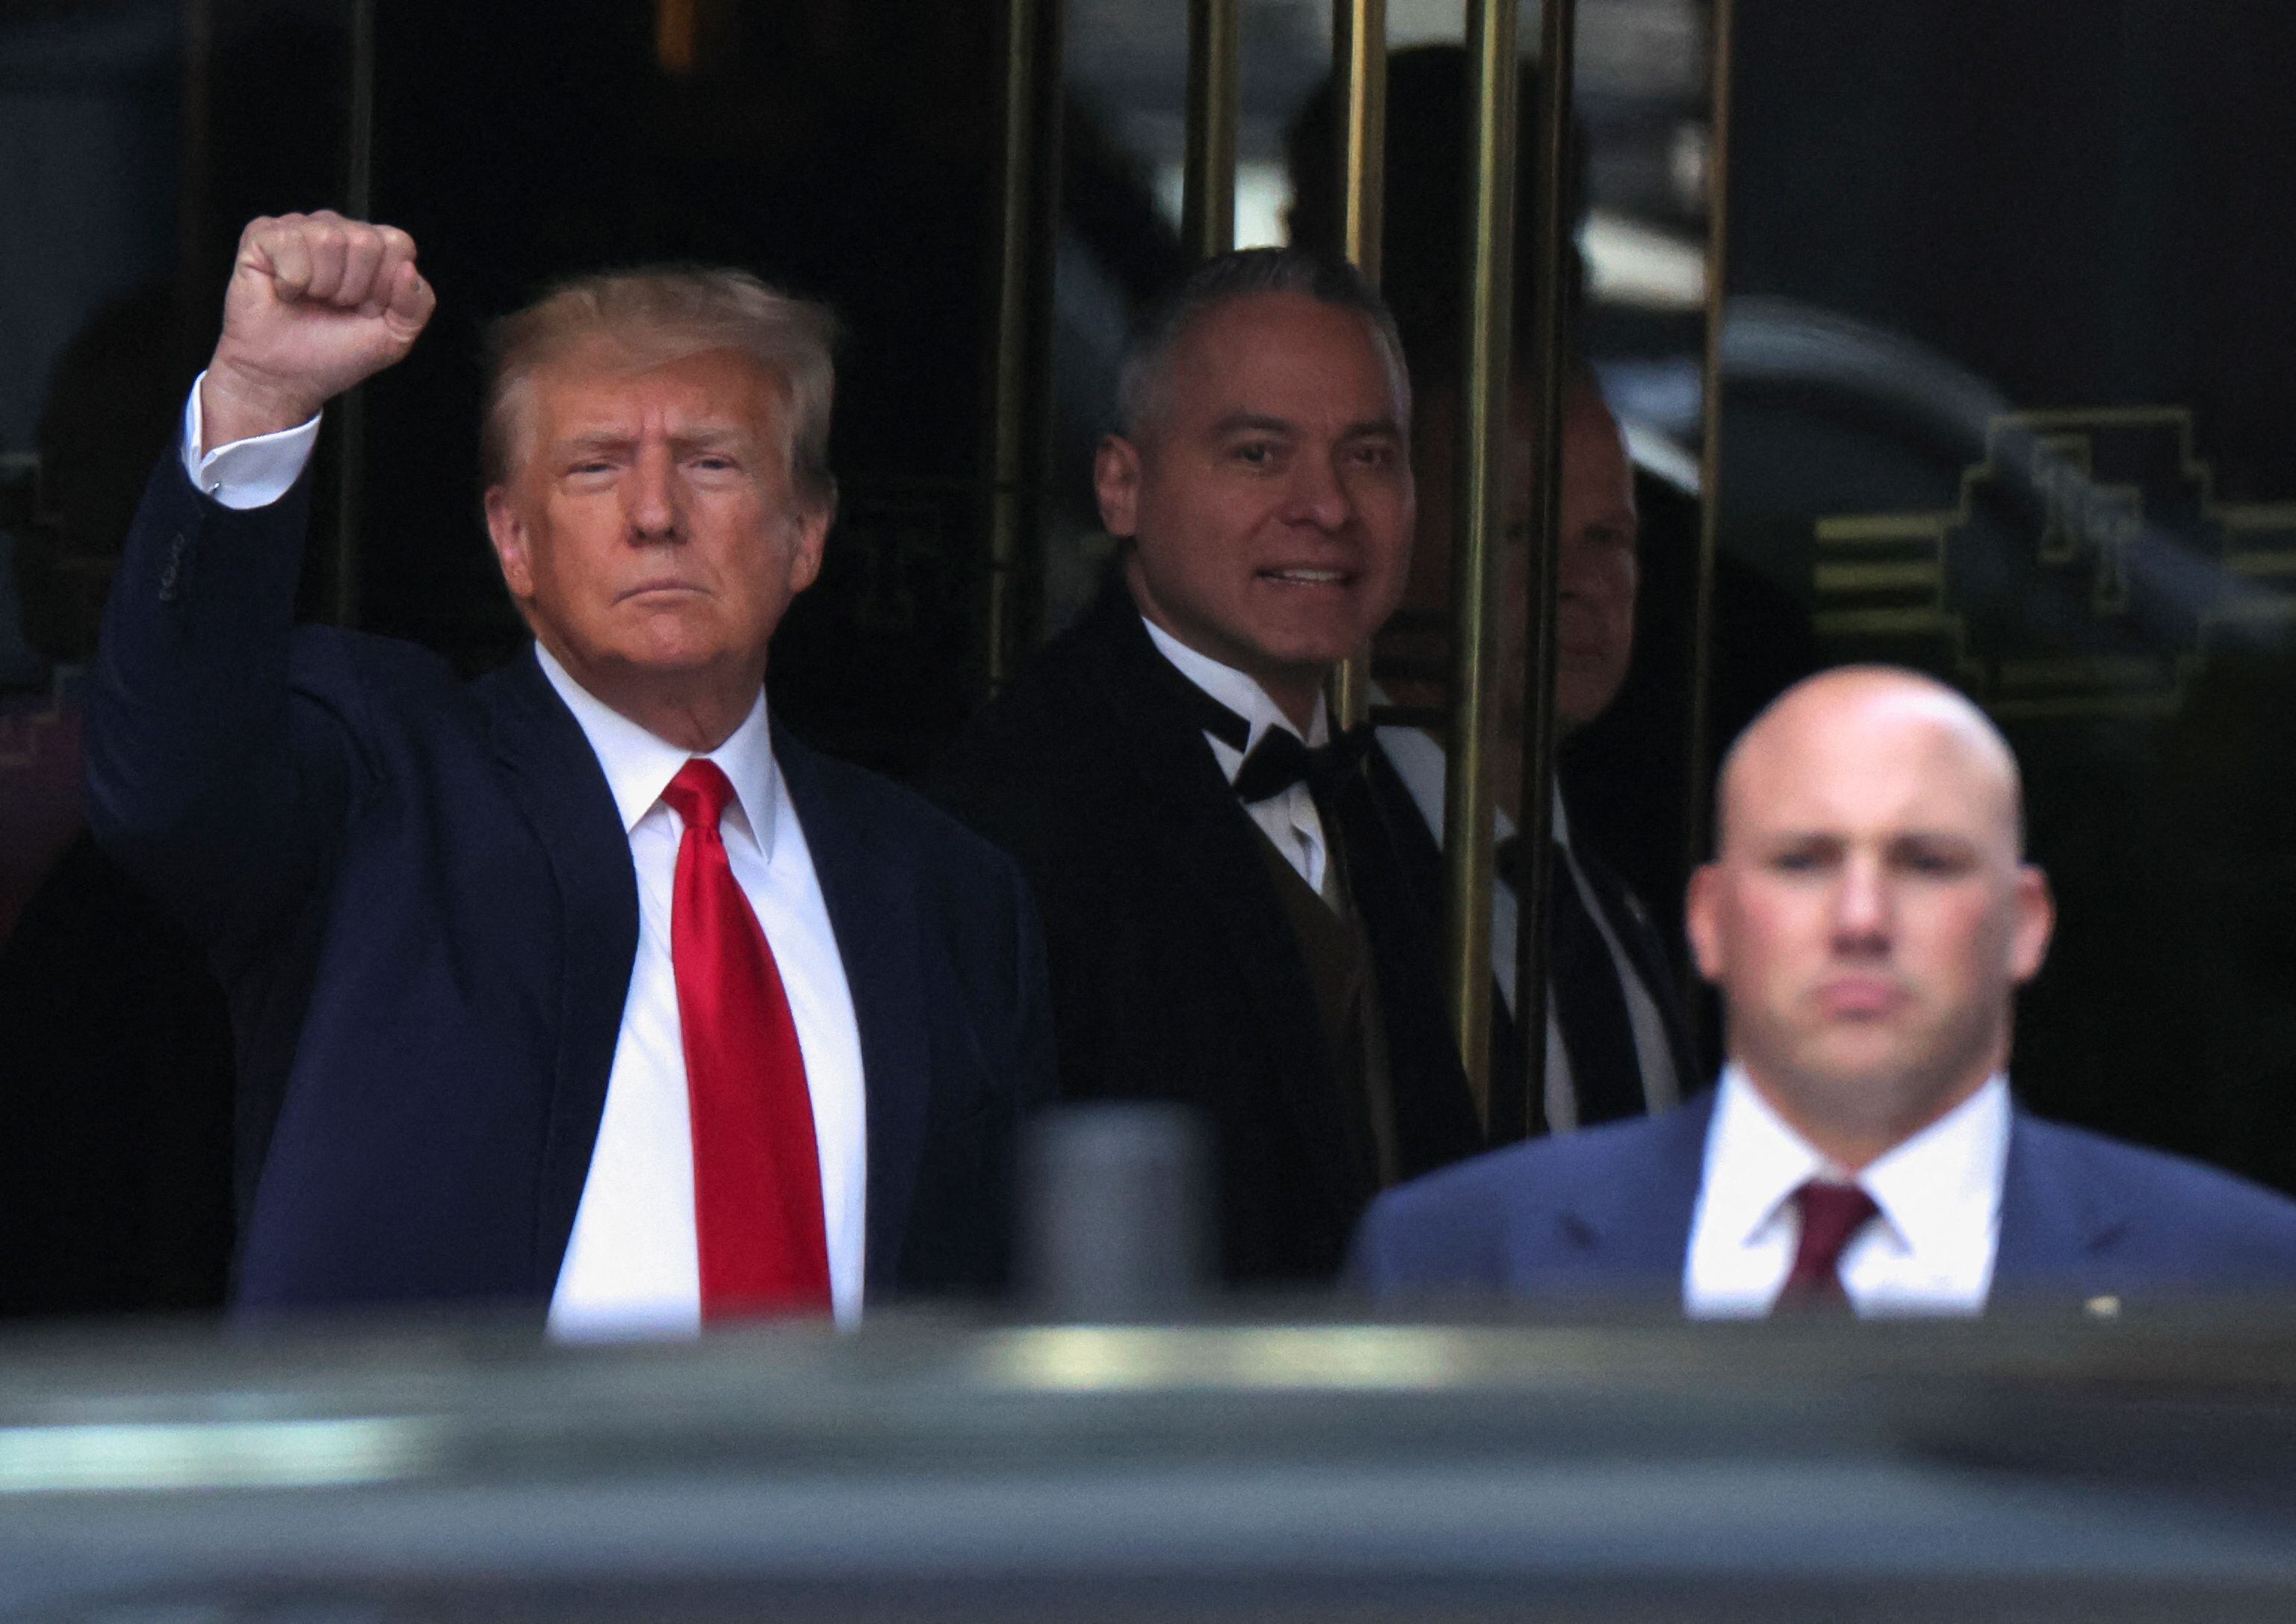 Former U.S. President Donald Trump departs from Trump Tower on the day of Trump's planned court appearance after his indictment by a Manhattan grand jury following a probe into hush money paid to porn star Stormy Daniels, in New York City, U.S., April 4, 2023. REUTERS/Carlos Barria